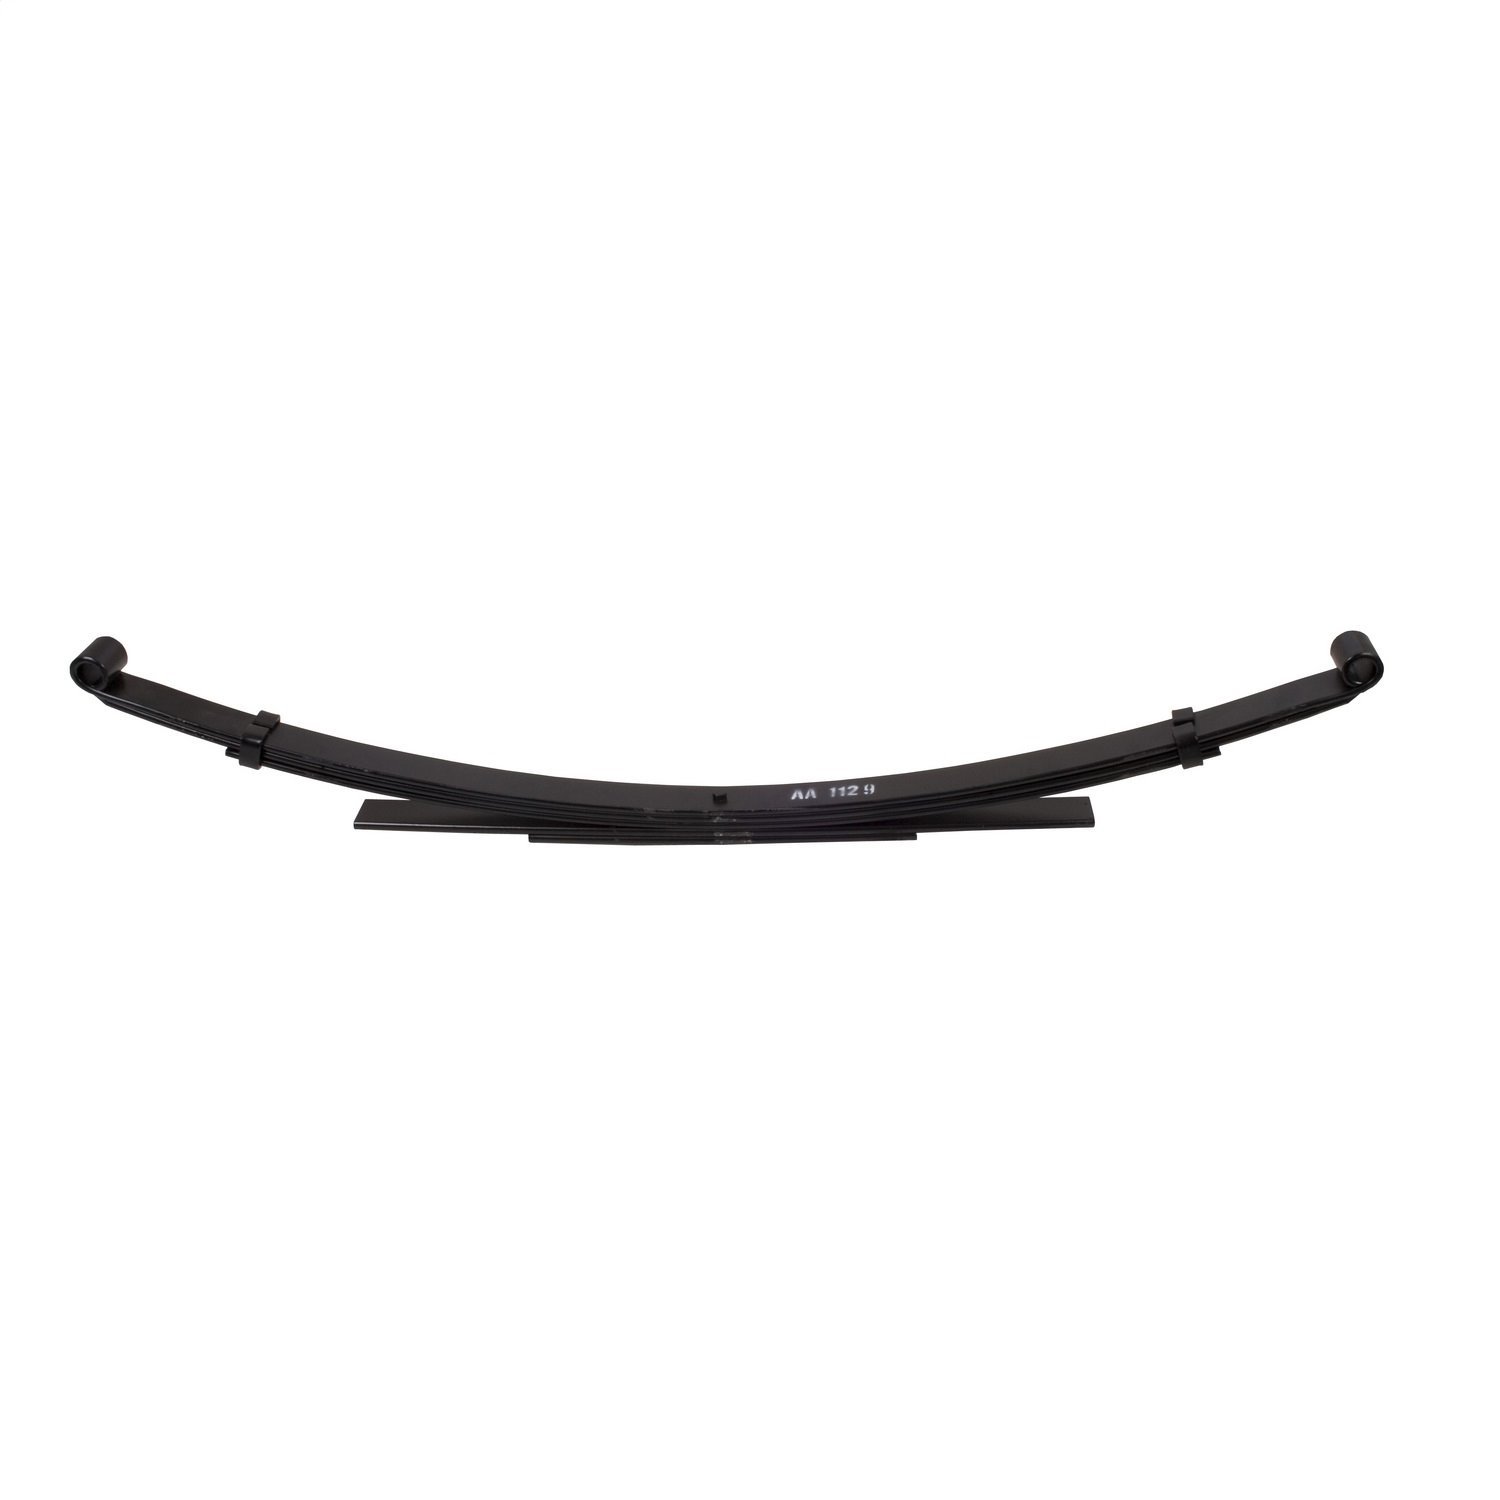 5 leaf replacement rear leaf spring from Omix-ADA, Fits 55-75 Jeep CJ5.